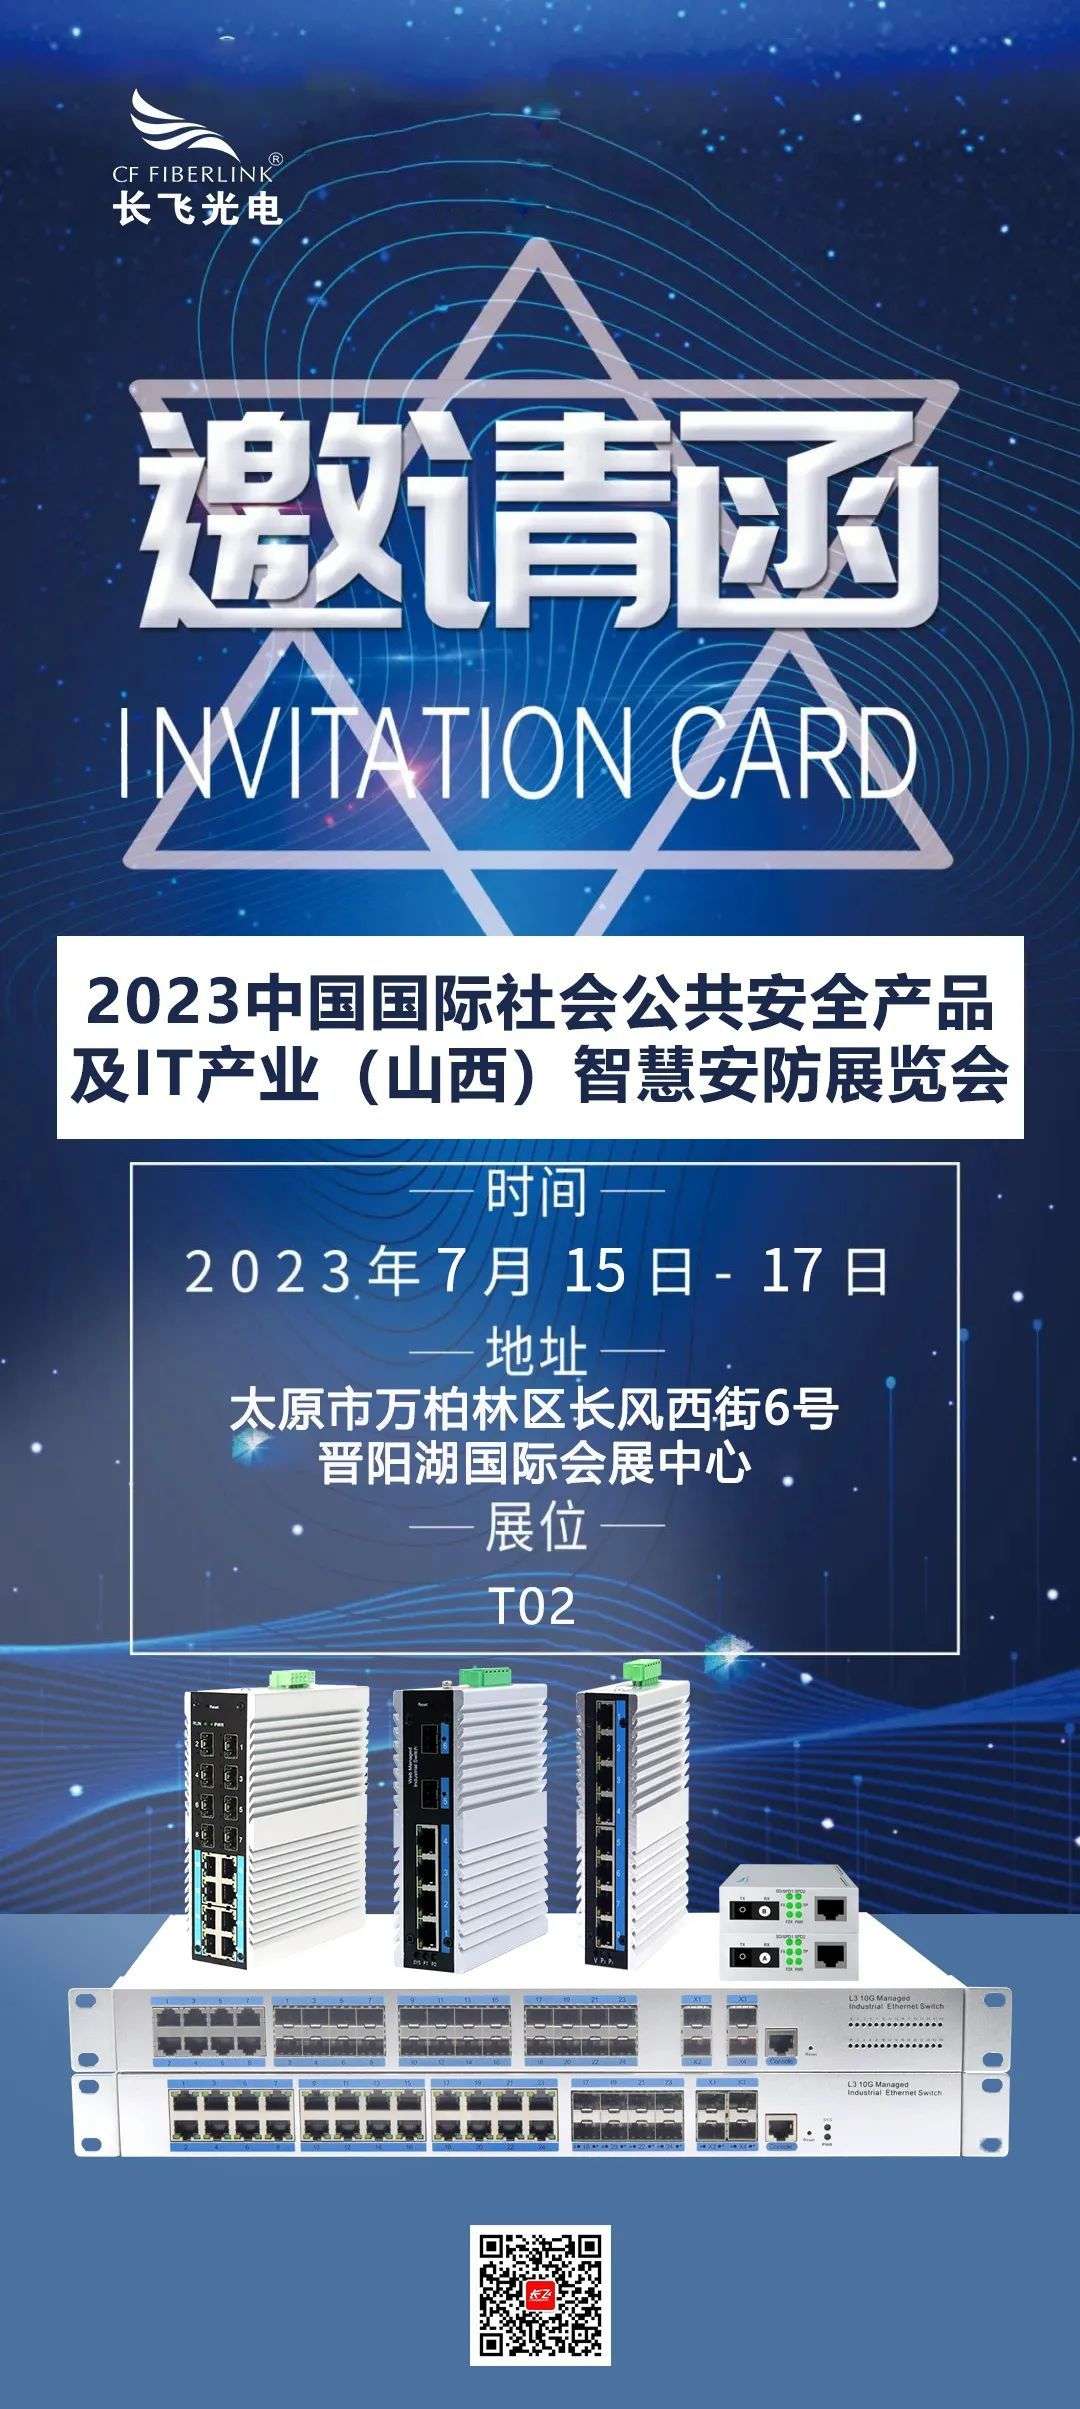 Changfei Optoelectronics and Shanxi Zhongcheng invite you to participate in the 2023 China International Public Security Products and IT Industry (Shanxi) Smart Security Exhibition